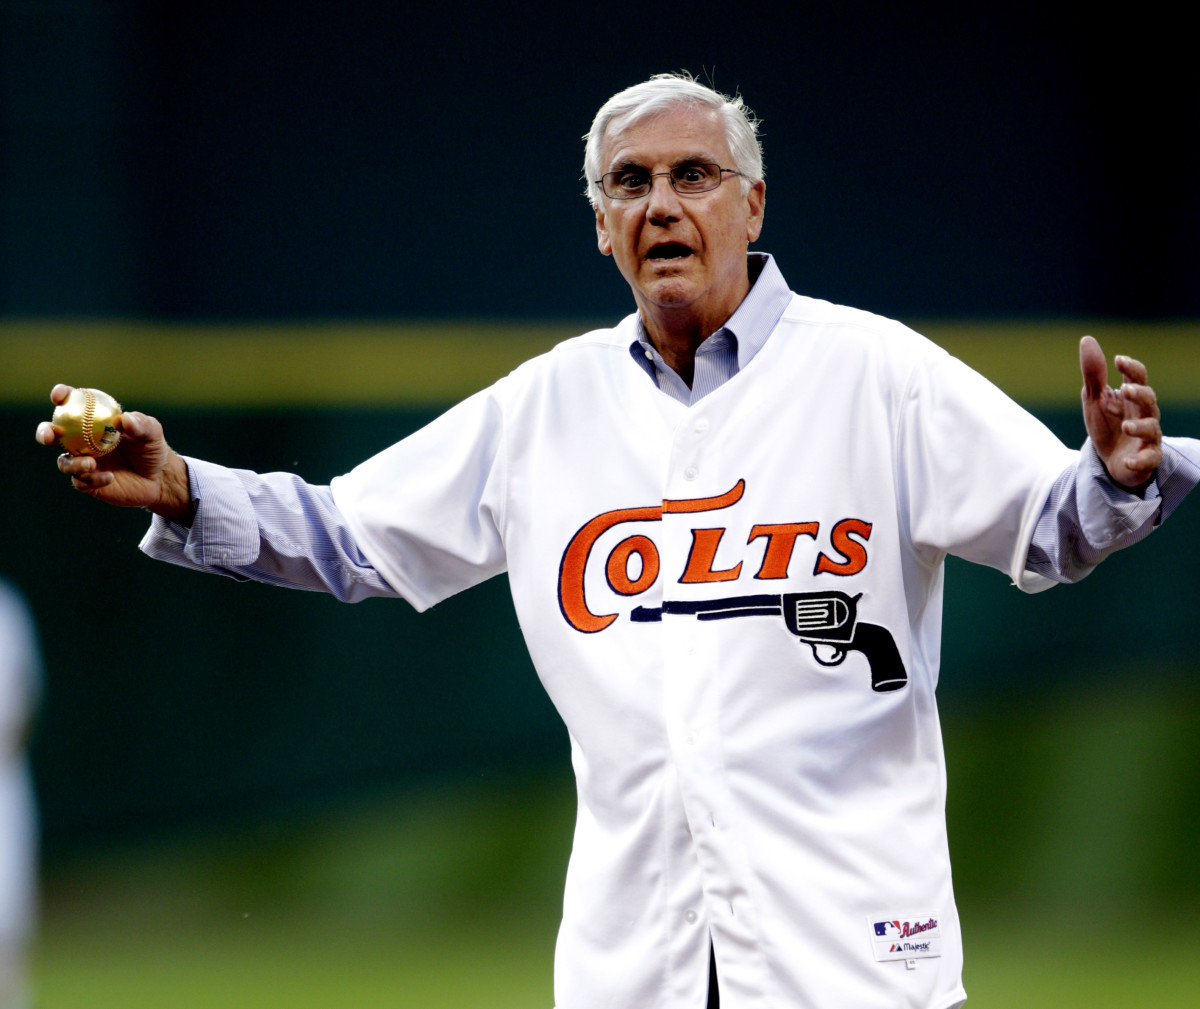 Bob Aspromonte, an original member of the Houston Colt 45's, throws out the ceremonial first pitch before a game between the Atlanta Braves and Houston Astros at Minute Maid Park on April 10, 2012.